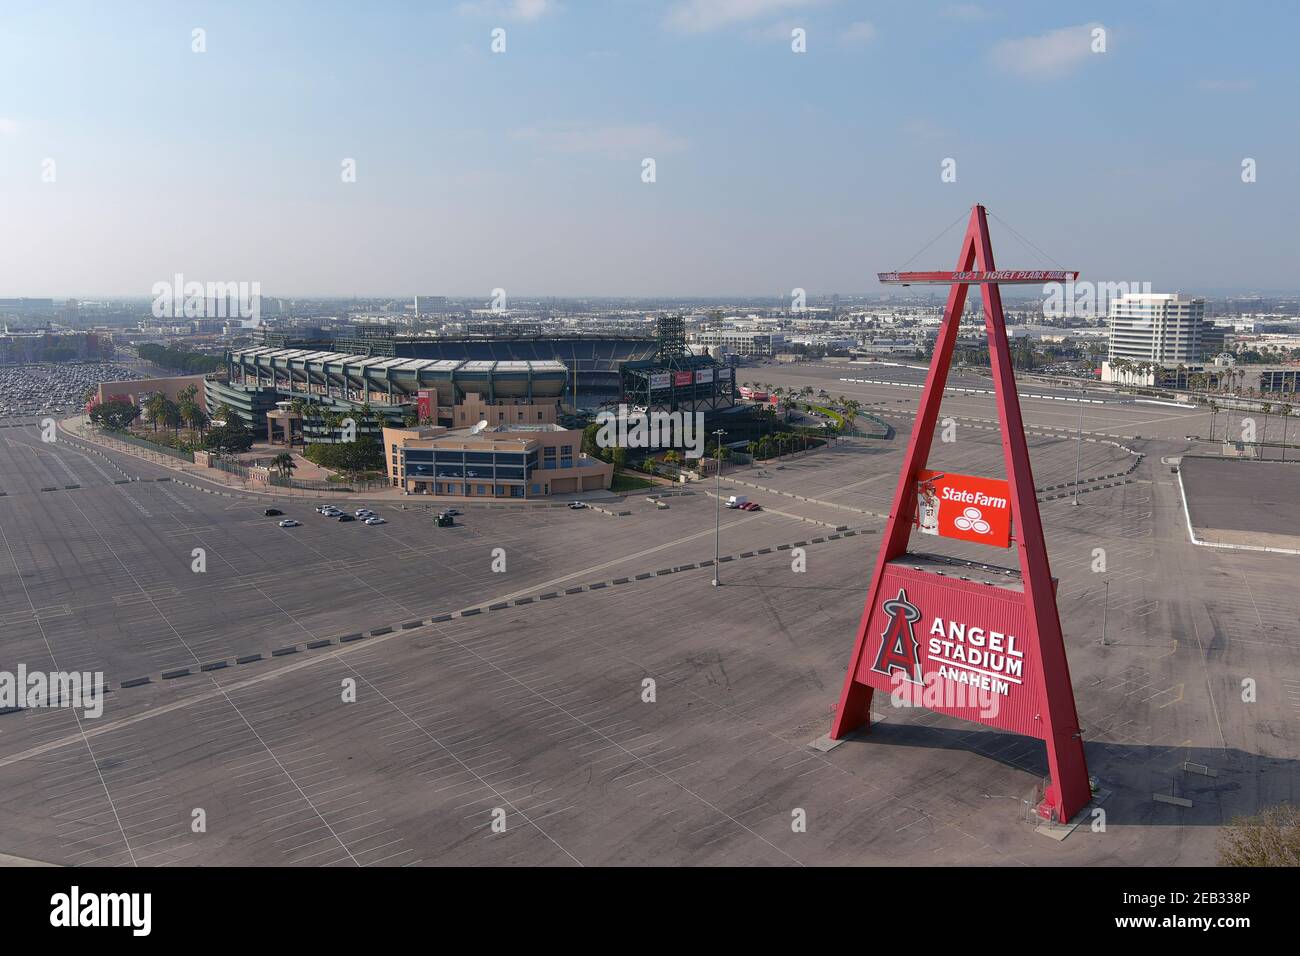 The Big A marquee sign at Angel Stadium of Anahiem, Wednesday, Feb. 10, 2021, in Anaheim, Calif. Stock Photo